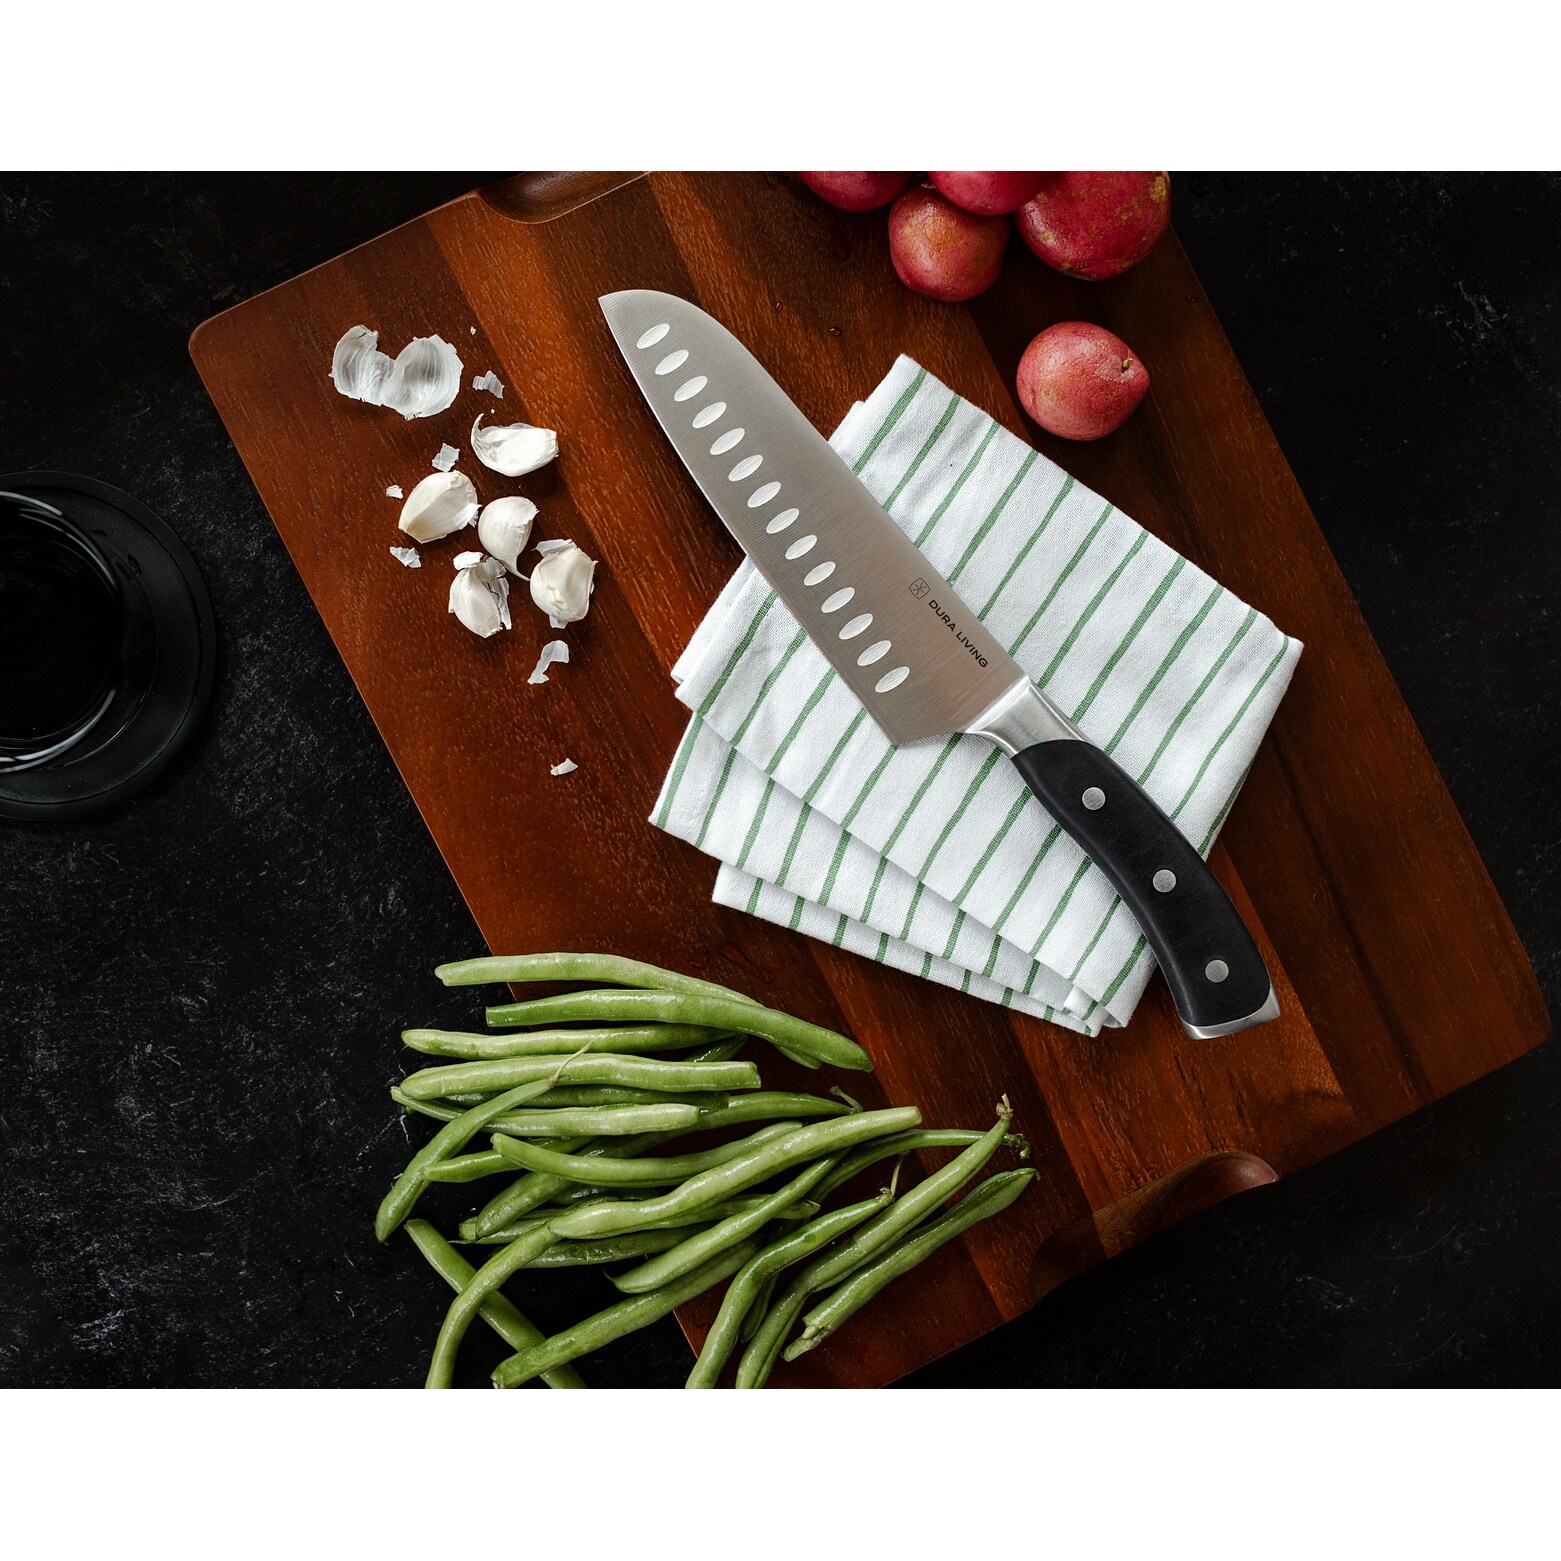 Dura Living EcoCut 2-Piece Santoku Knife Set - High Carbon Stainless Steel Blades, Sustainable Ergonomic Handles, Eco-Friendly Knives with Sheaths